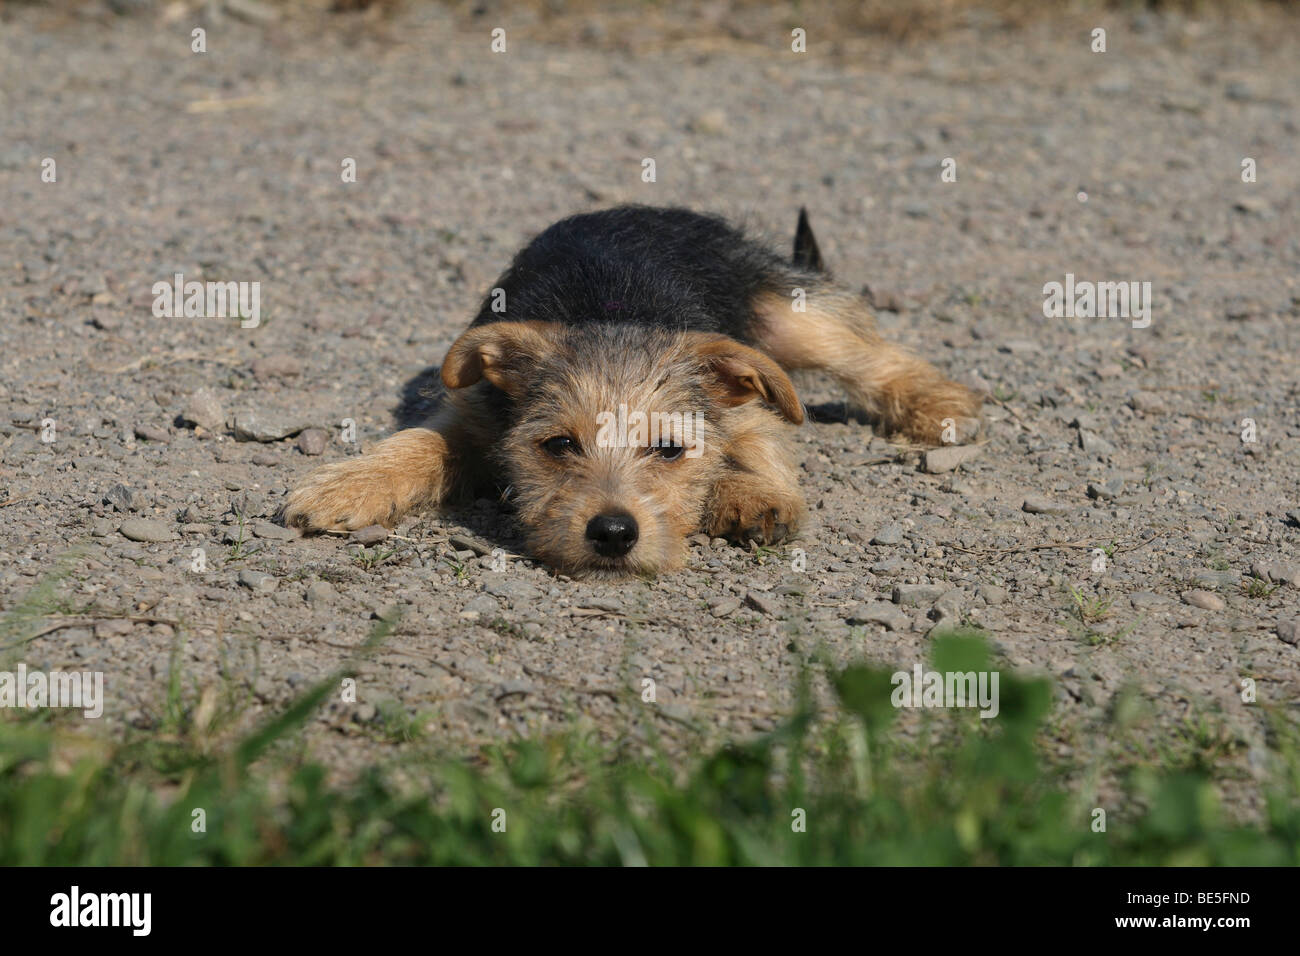 Yorkshire Terrier-Jack Russell Terrier hybrid, 14 weeks old, lying on a path in a park Stock Photo